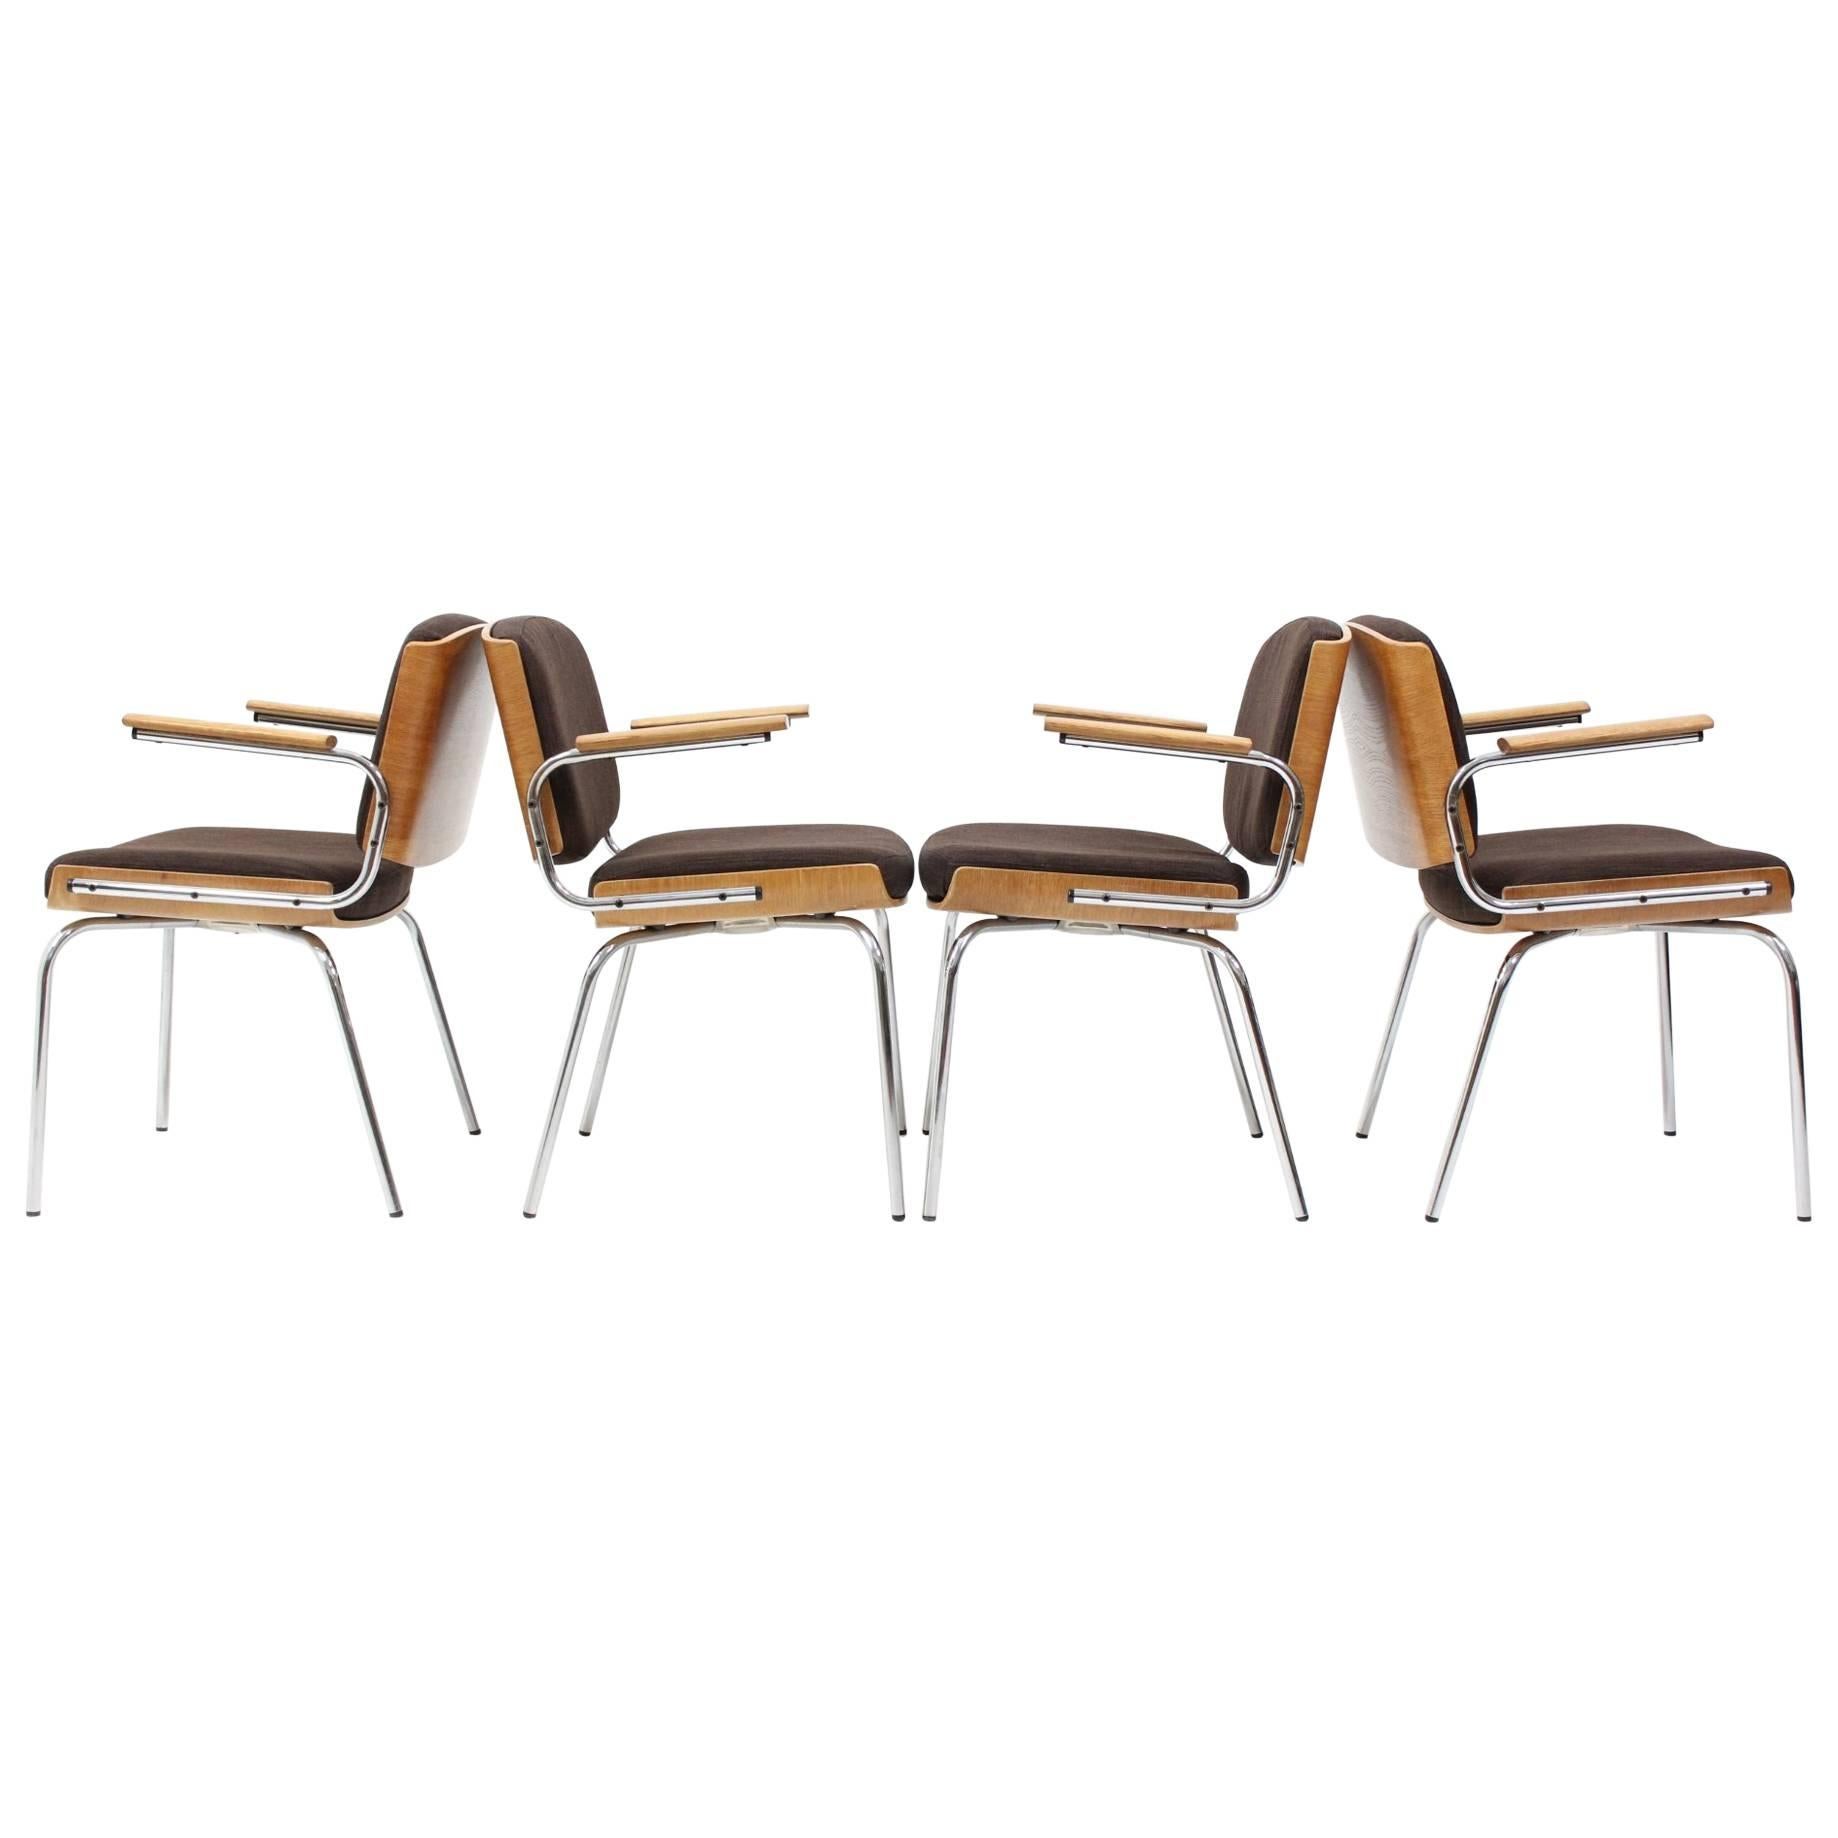 Set of Four Duba Dining Chairs in Chromed Steel and Plywood, 1970s